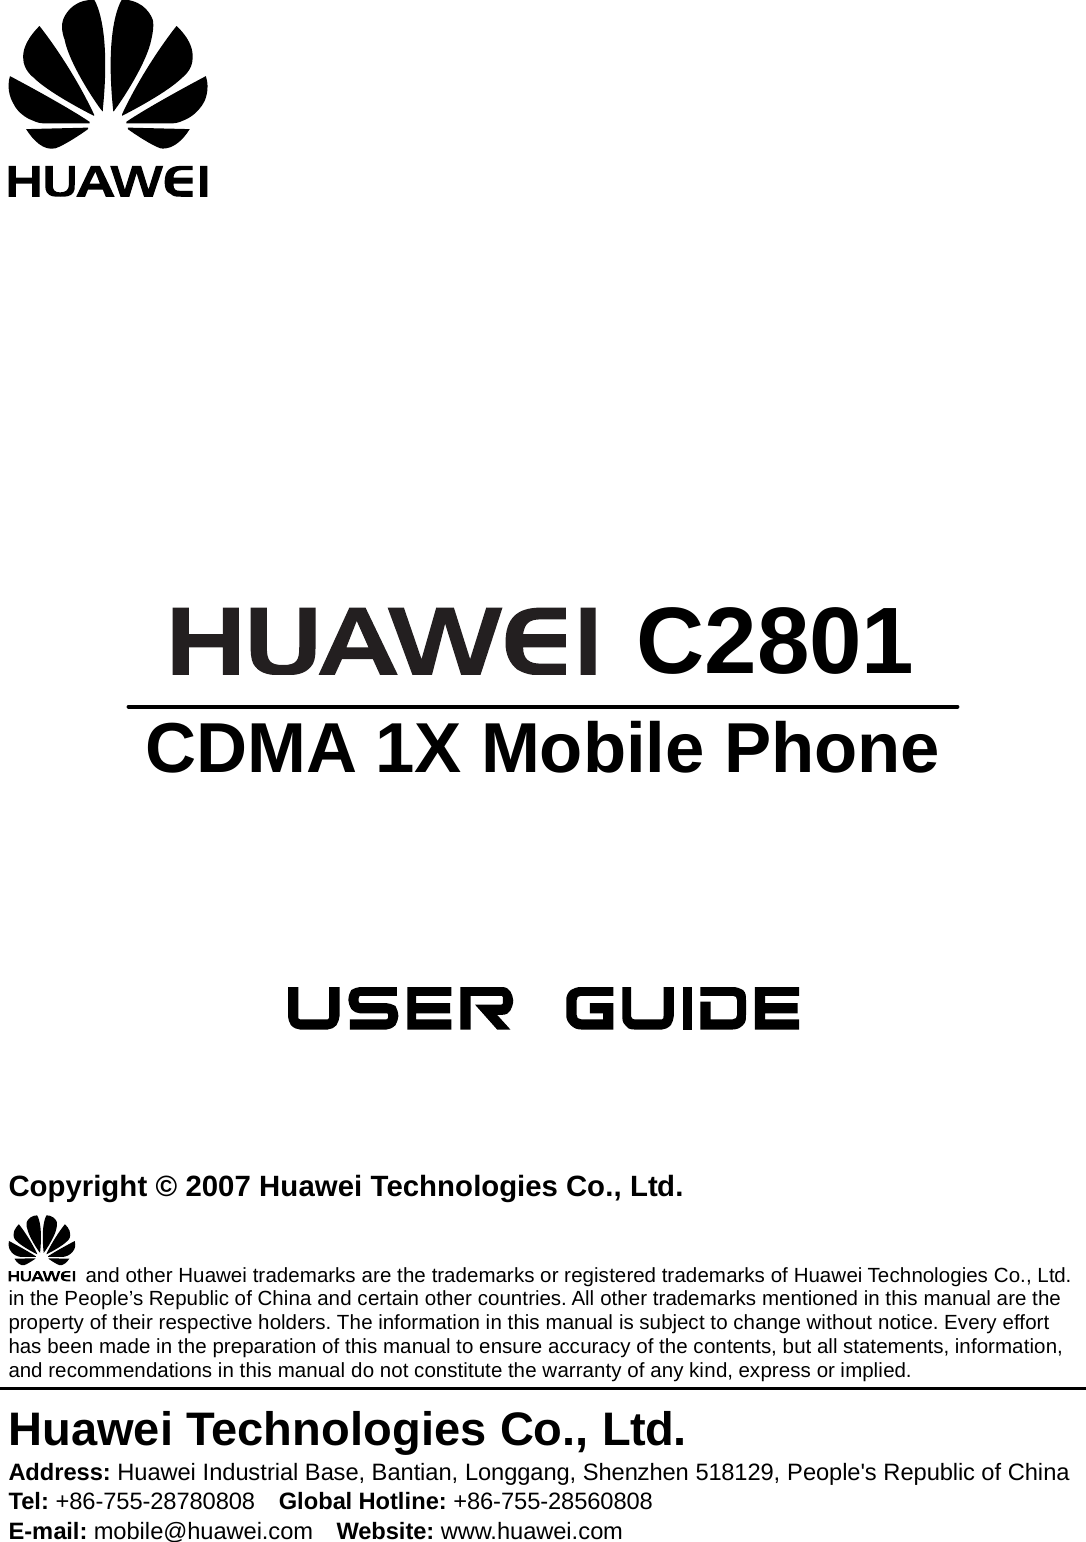         C2801 CDMA 1X Mobile Phone       Copyright © 2007 Huawei Technologies Co., Ltd.   and other Huawei trademarks are the trademarks or registered trademarks of Huawei Technologies Co., Ltd. in the People’s Republic of China and certain other countries. All other trademarks mentioned in this manual are the property of their respective holders. The information in this manual is subject to change without notice. Every effort has been made in the preparation of this manual to ensure accuracy of the contents, but all statements, information, and recommendations in this manual do not constitute the warranty of any kind, express or implied. Huawei Technologies Co., Ltd. Address: Huawei Industrial Base, Bantian, Longgang, Shenzhen 518129, People&apos;s Republic of China Tel: +86-755-28780808    Global Hotline: +86-755-28560808 E-mail: mobile@huawei.com    Website: www.huawei.com 